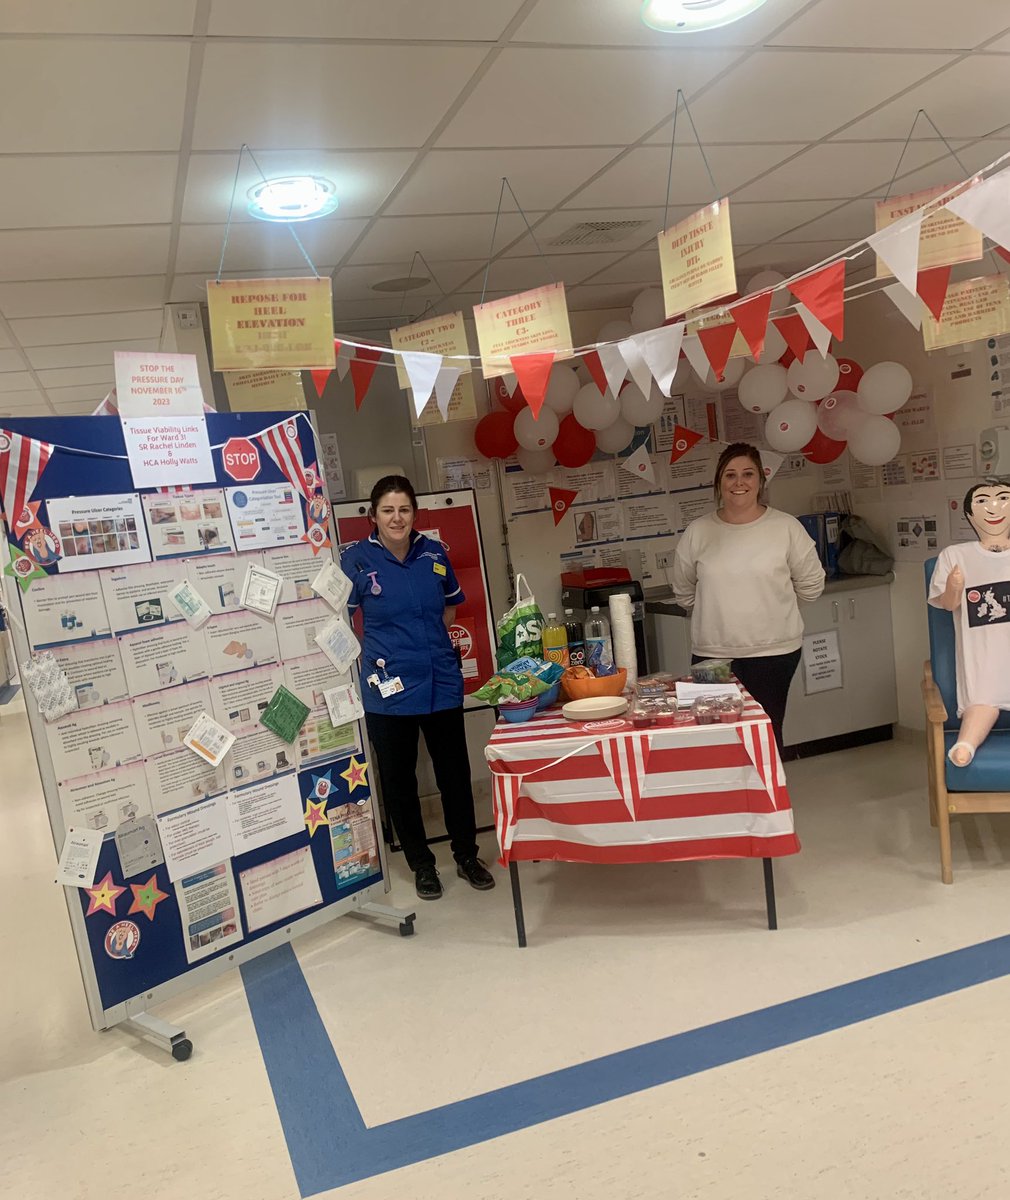 Ward 31, 👏👏Racheal and Holly doing a great job with highlighting the importance of pressure ulcer prevention. #StopThePressure #teammedicine.